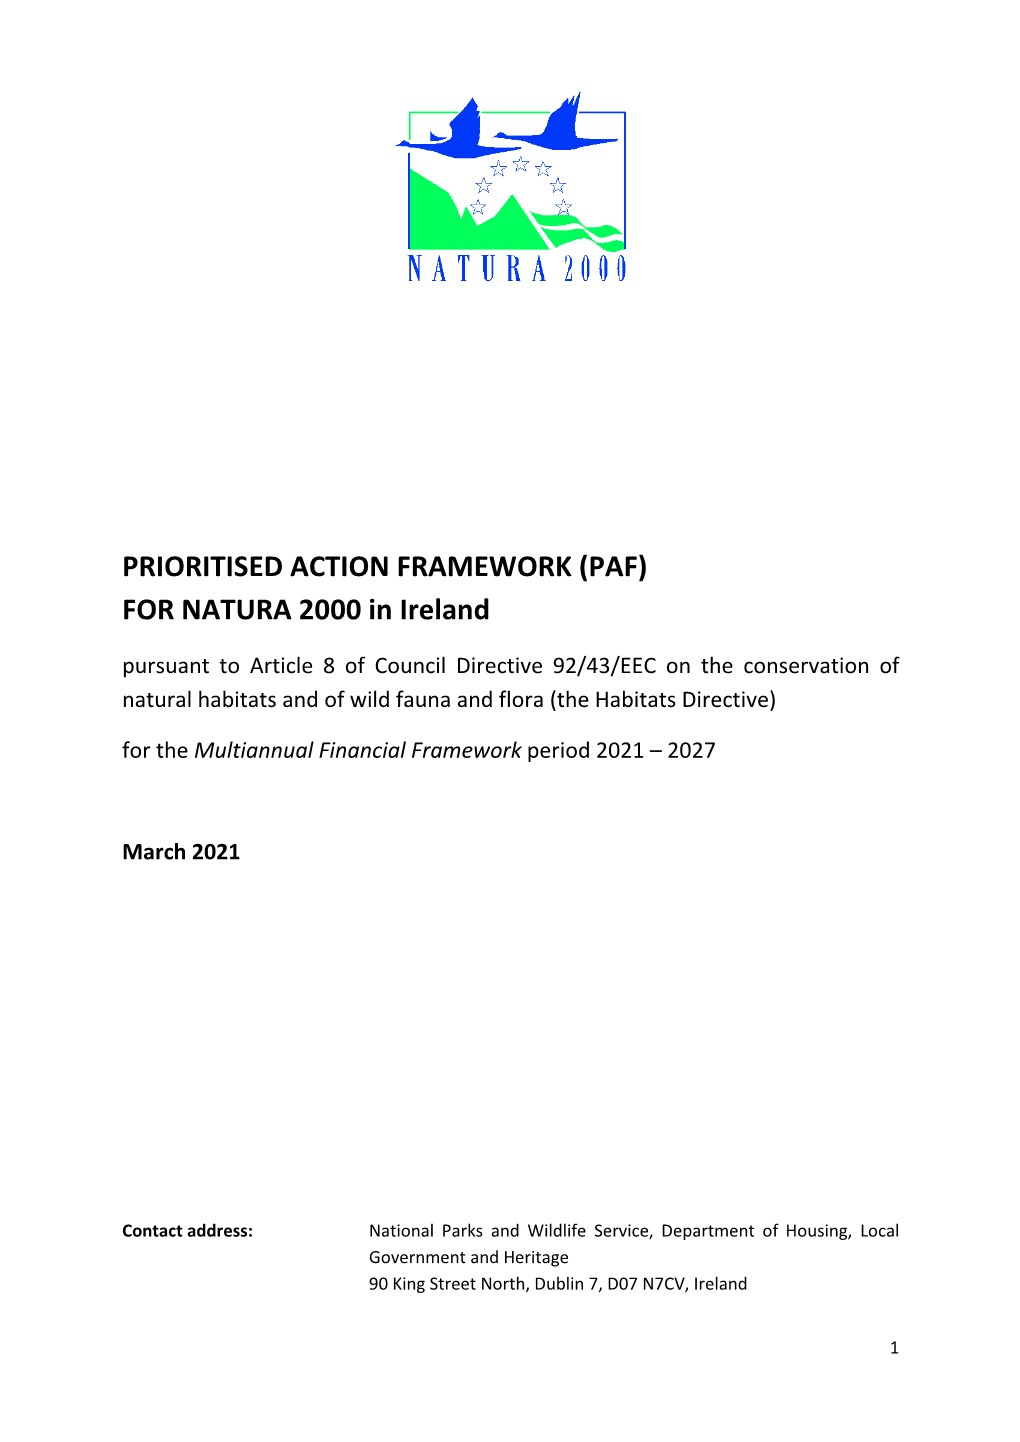 PRIORITISED ACTION FRAMEWORK (PAF) for NATURA 2000 in Ireland